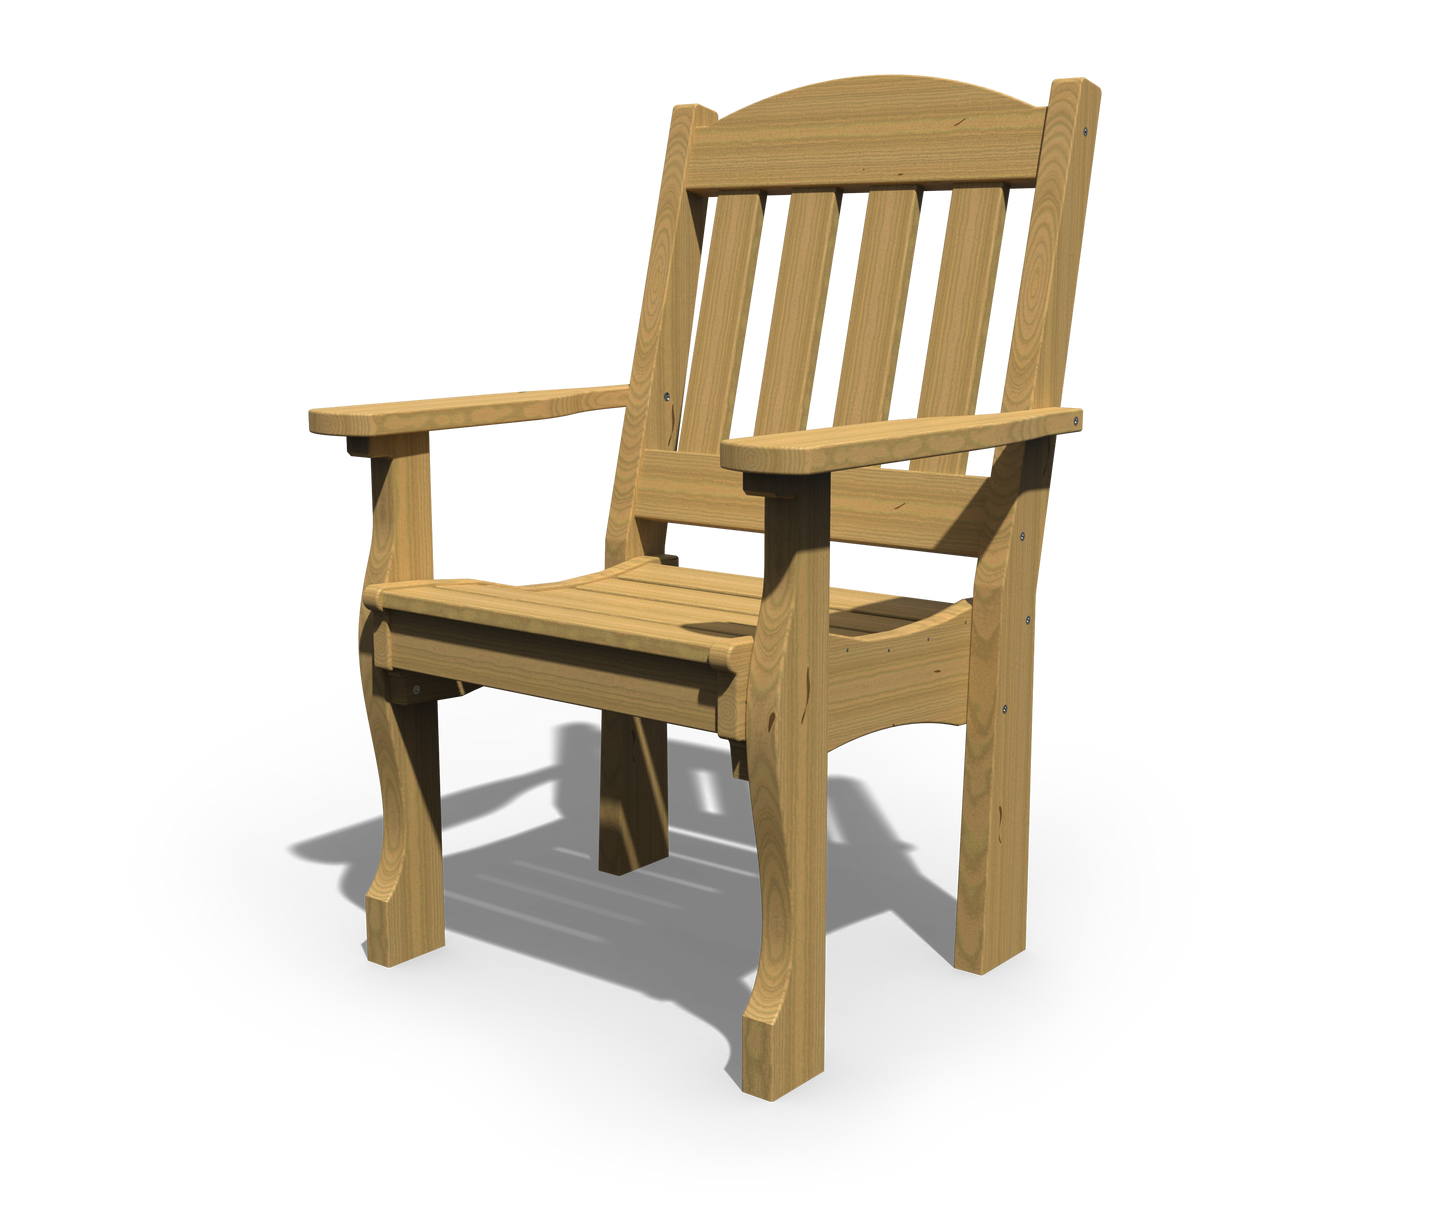 Patiova Pressure Treated Pine English Garden Arm Chair - LEAD TIME TO SHIP 3 WEEKS